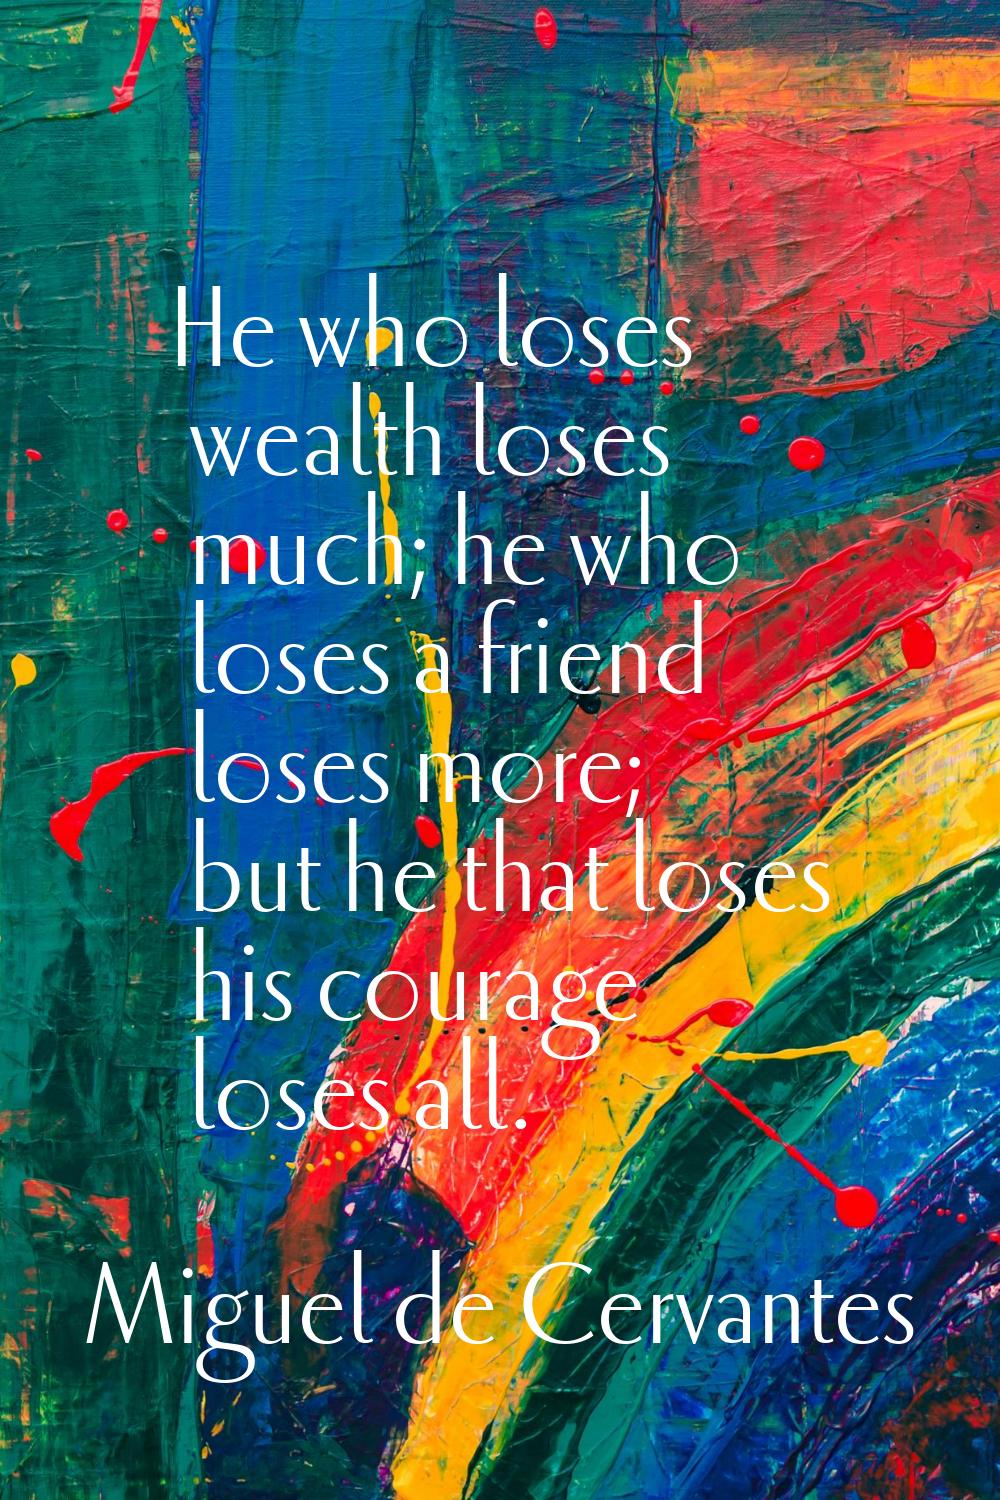 He who loses wealth loses much; he who loses a friend loses more; but he that loses his courage los